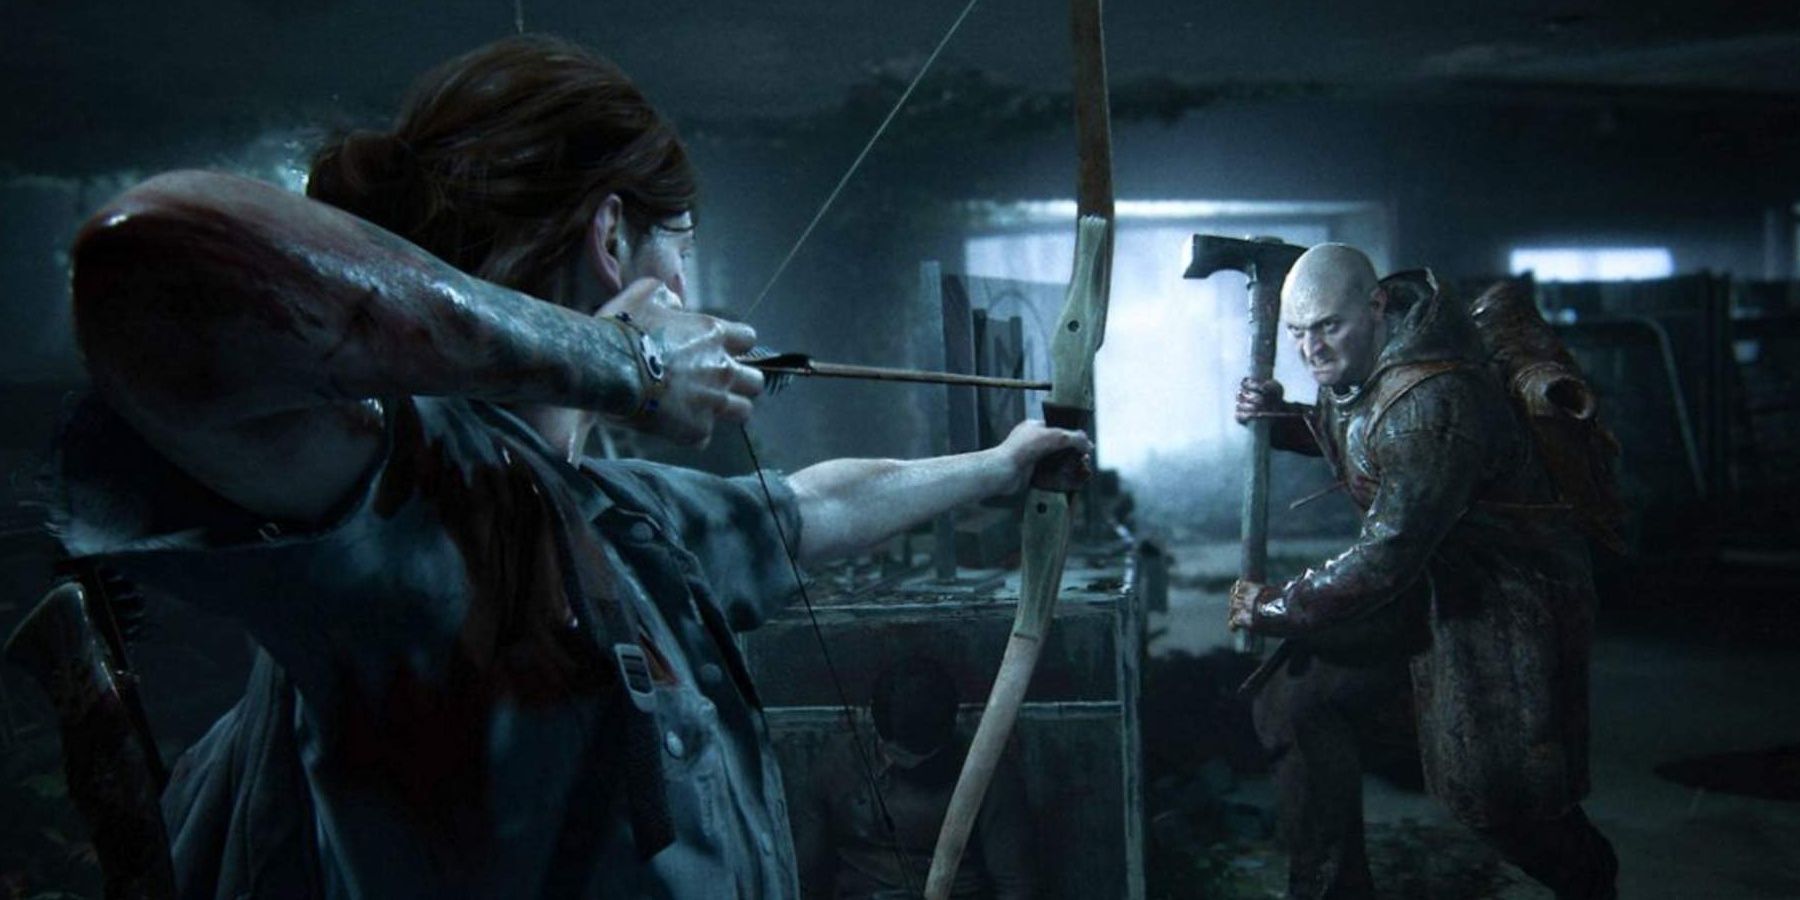 Ellie drawing her bow on an enemy in The Last of Us Part II